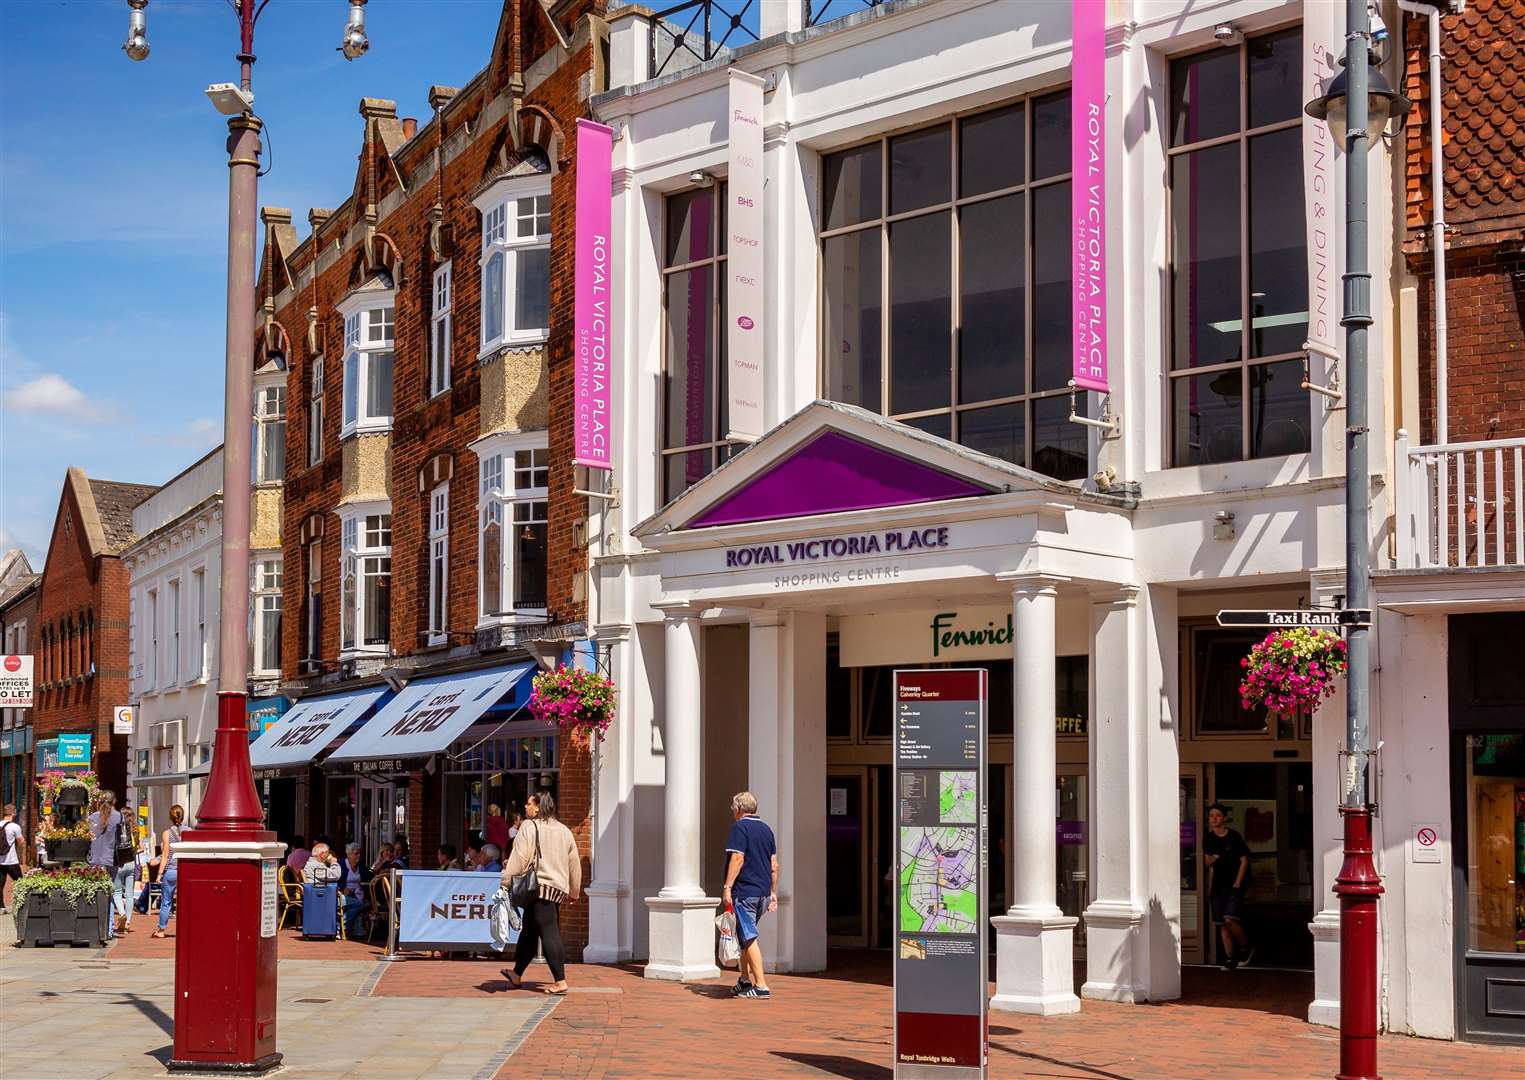 The Royal Victoria Place shopping mall in Tunbridge Wells